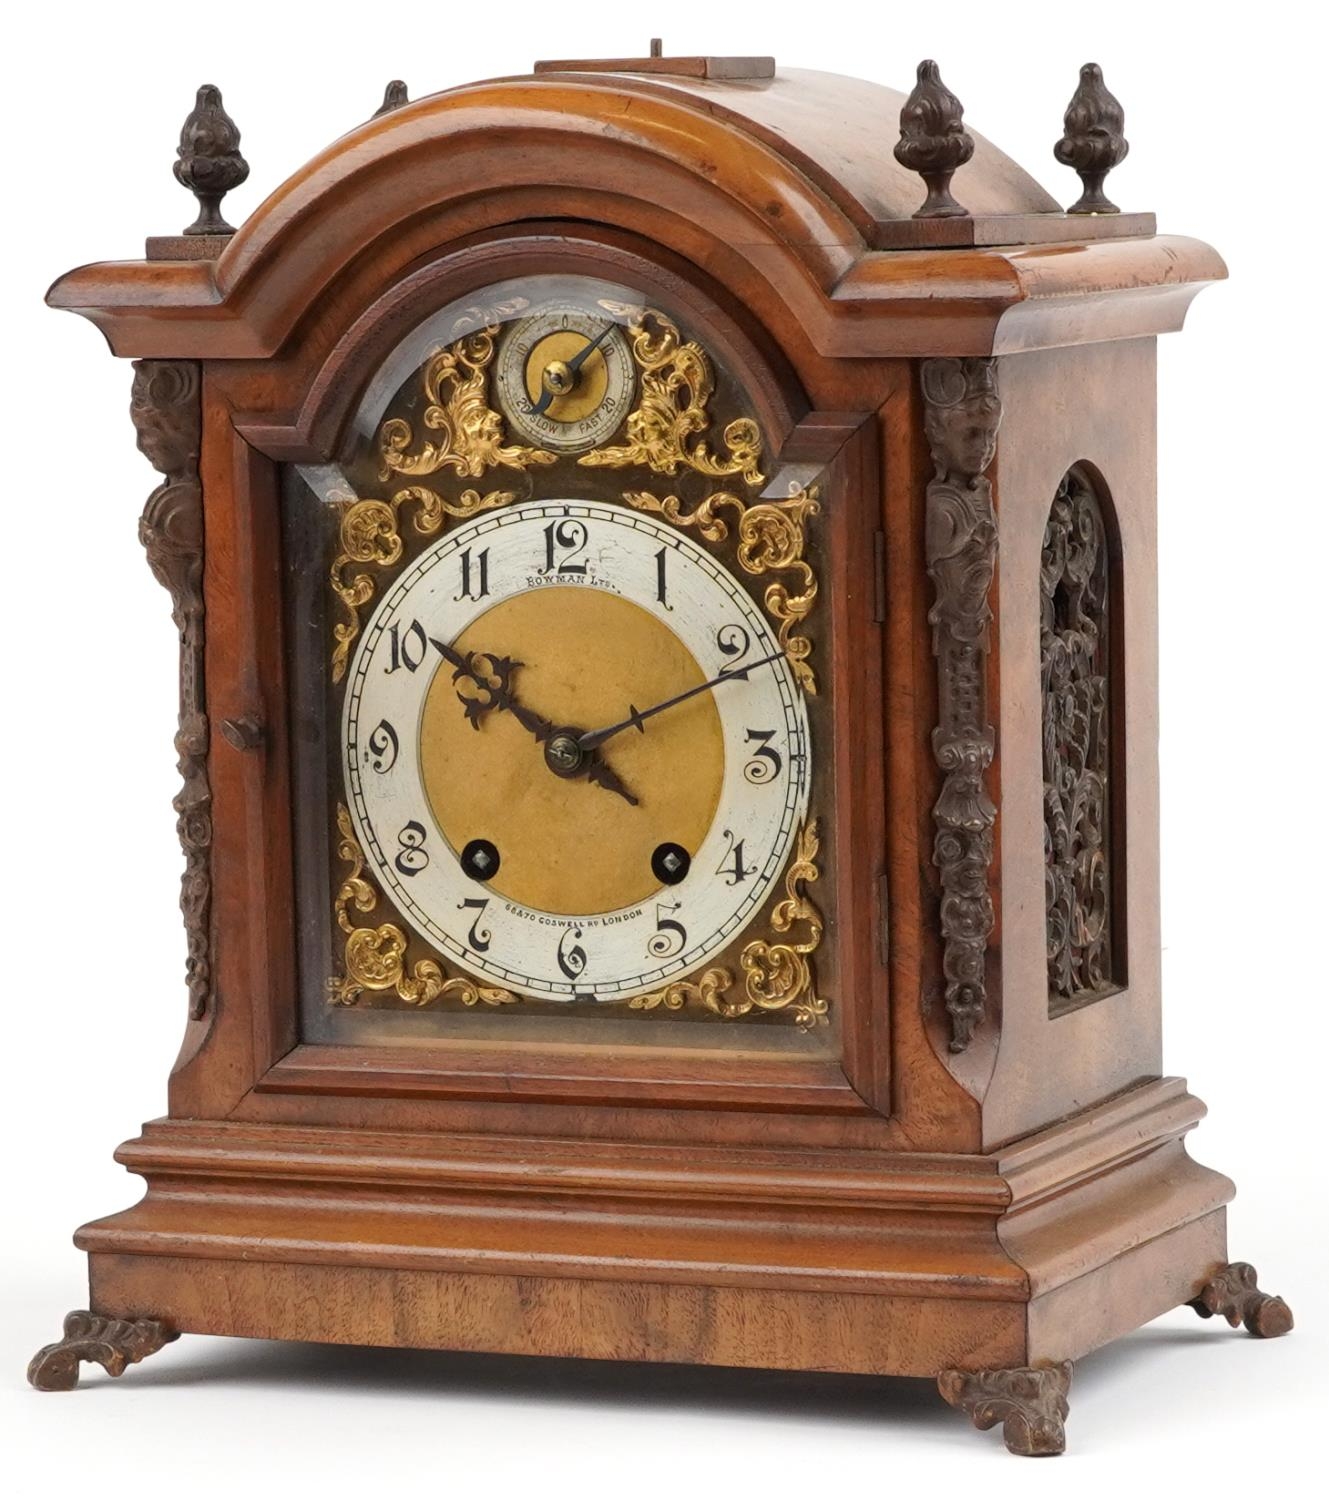 19th century walnut bracket clock striking on two gongs and silvered chapter ring having Arabic